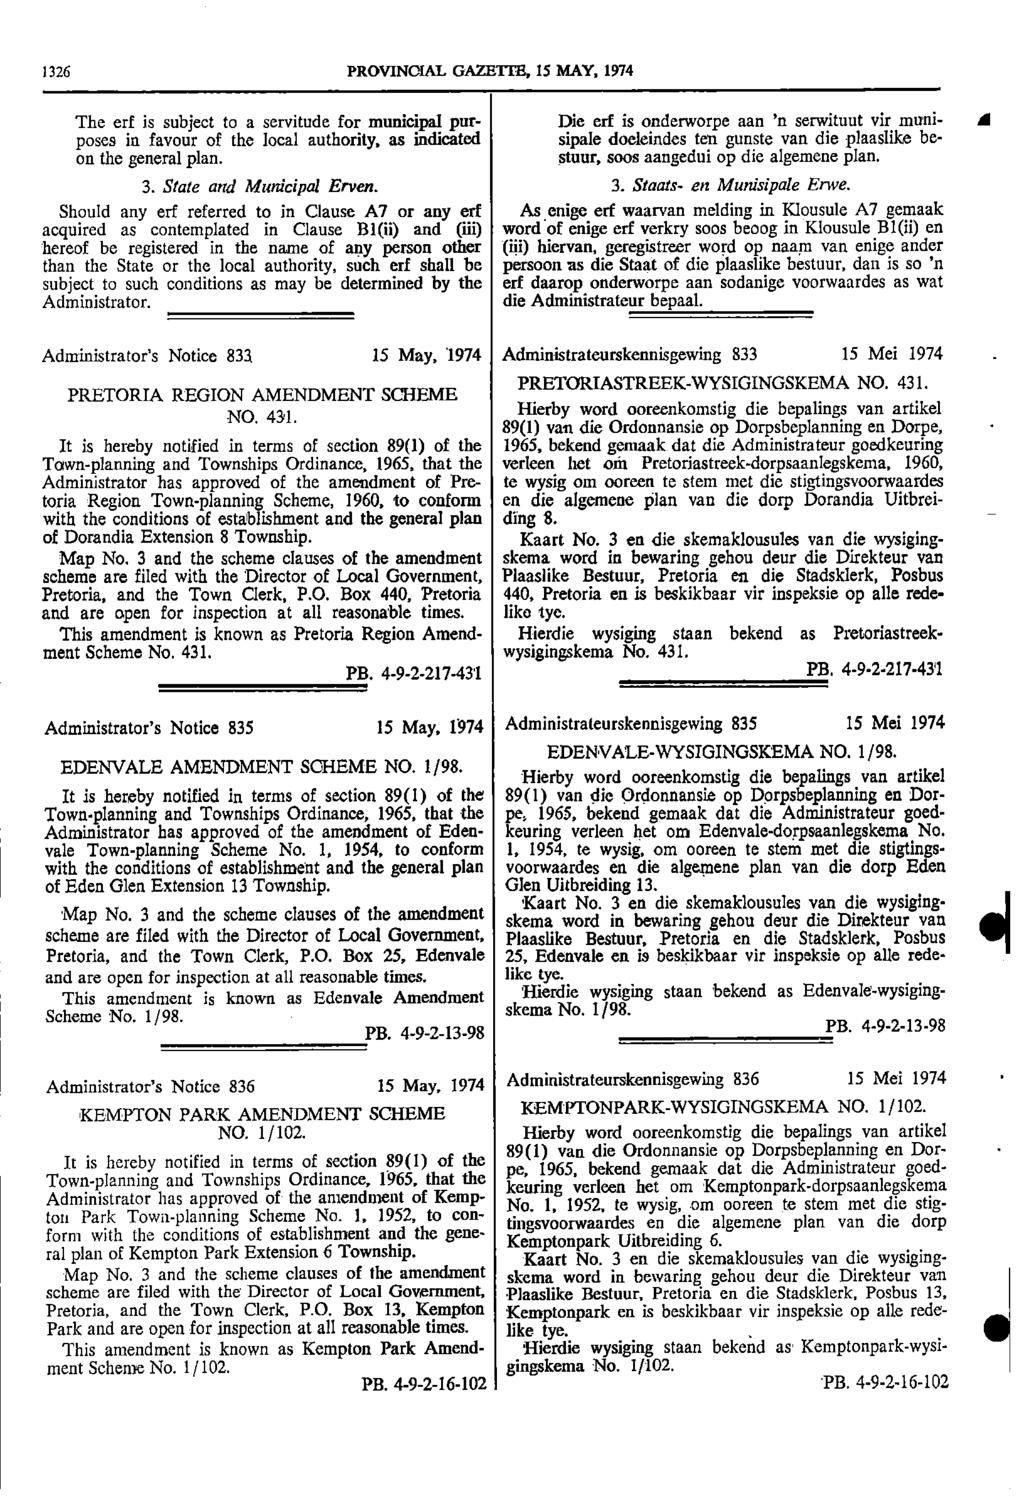 326 PROVINCIAL GAZETTE 5 MAY 974 The erf is subject to a servitude for municipal pur Die erf is onderworpe aan n serwituut vir muni I poses in favour of the local authority as indicated sipale